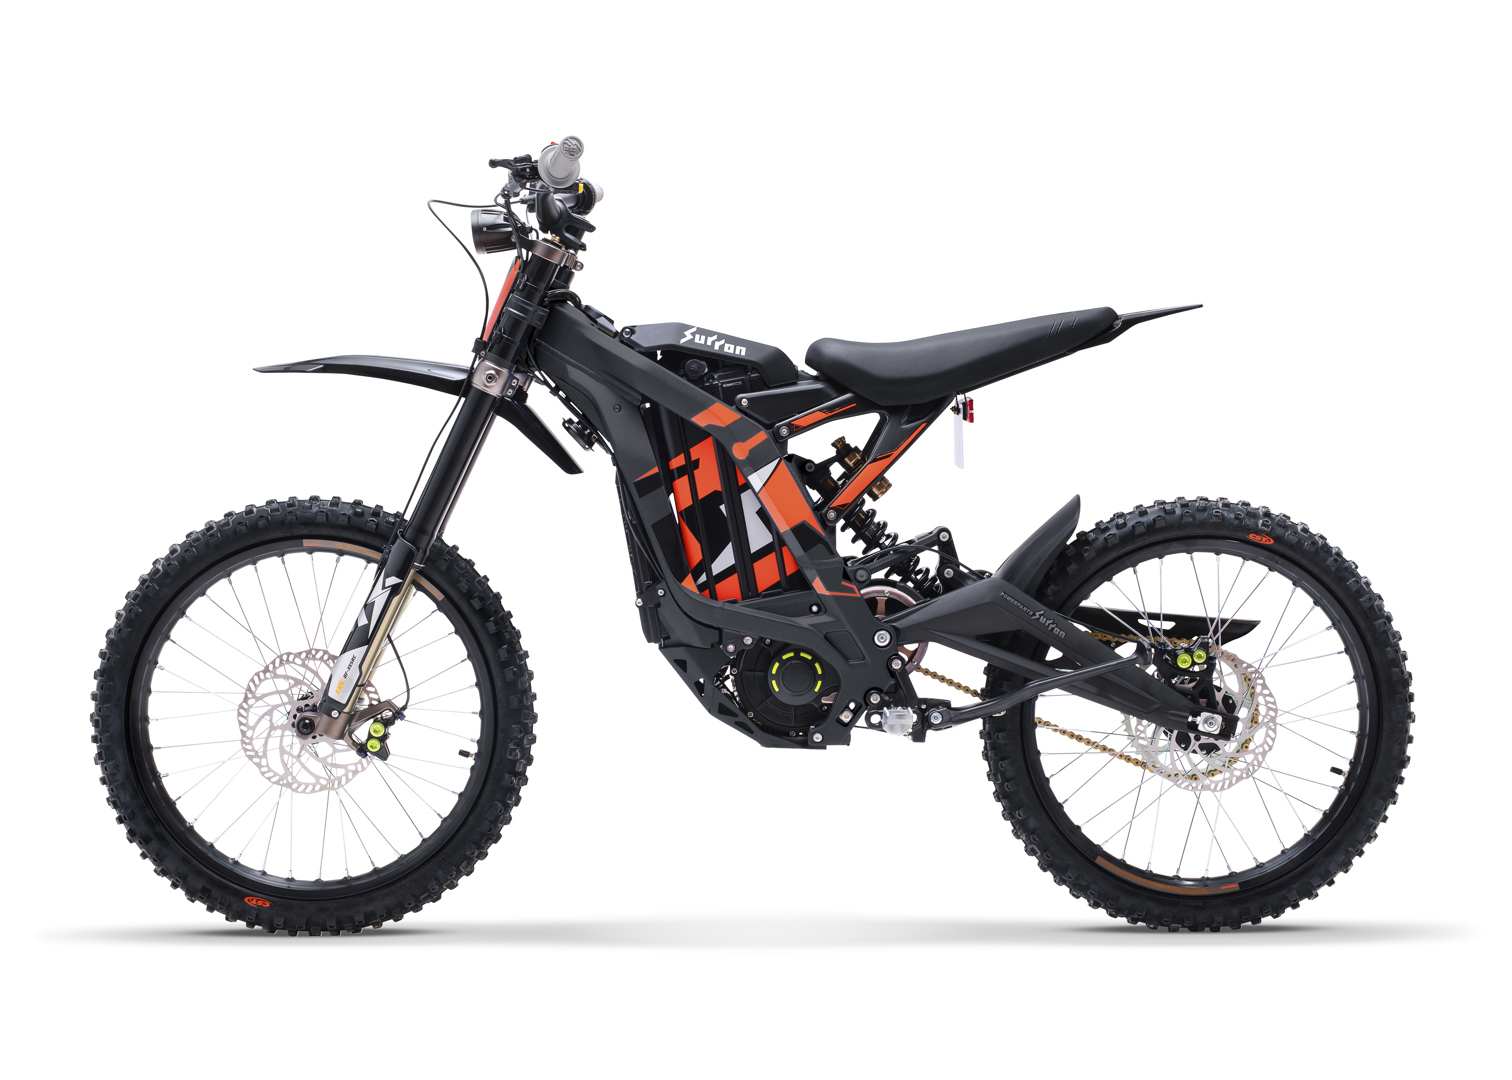 2023 SURRON Light Bee X in stock and ready to ride!